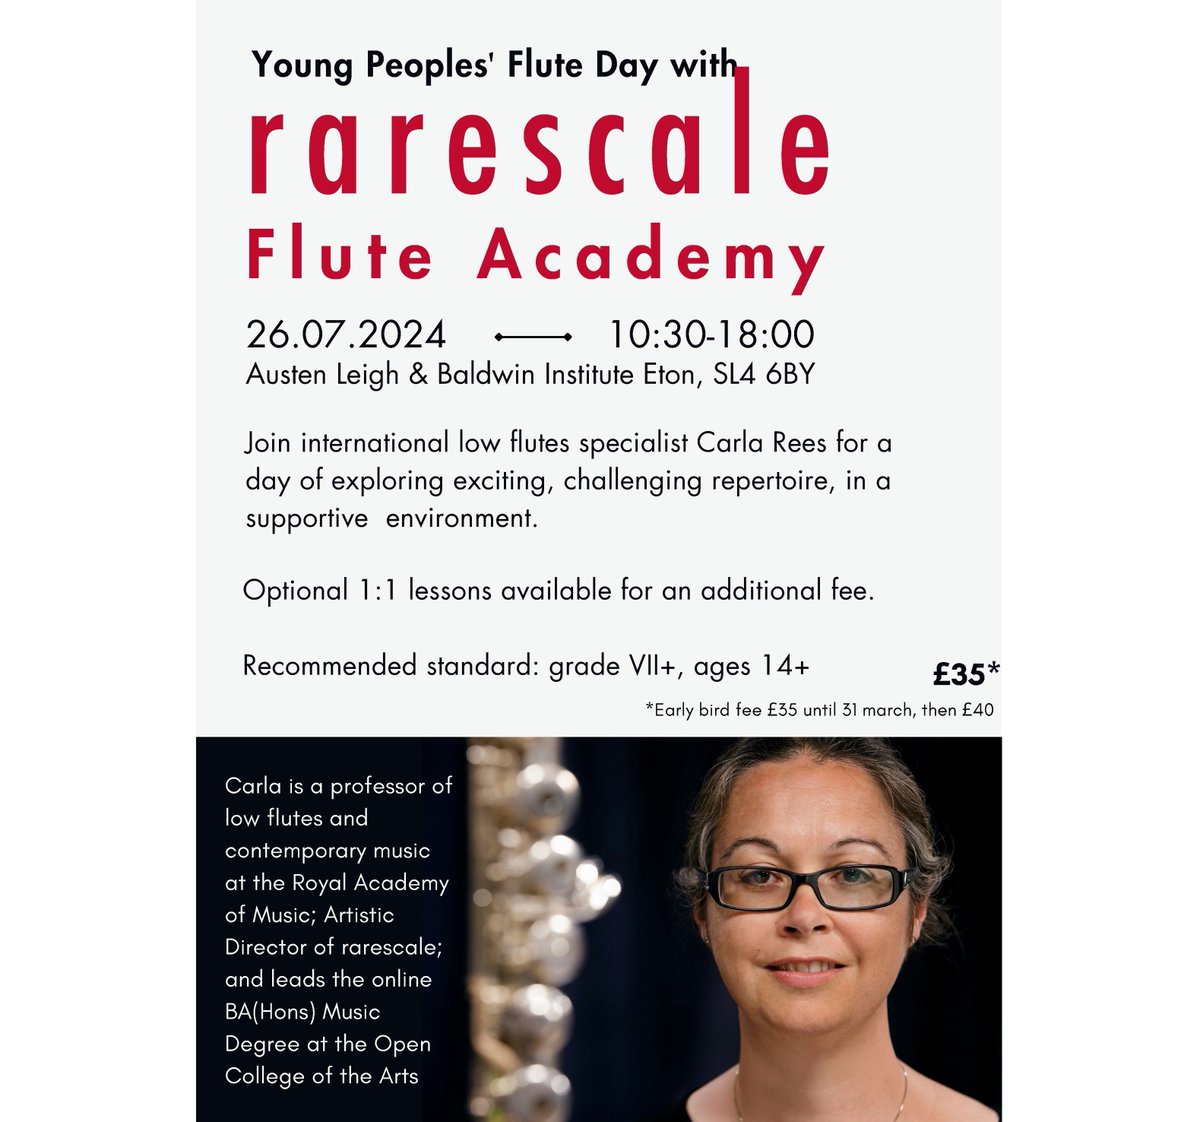 🎶 Join @rarescale Flute Academy at the Austen Leigh & Baldwin Institute in Eton! 🎵 🔹 Young Peoples' Flute Day 📅 Friday, July 26 🕥 10:30 AM - 6:00 PM 🔹 Flute Day with Rarescale Flute Academy 📅 Sat July 27 🕥 10:30 AM - 6:00 PM 🎟️ Tickets £40 🔗rarescale.org.uk/section885748.…